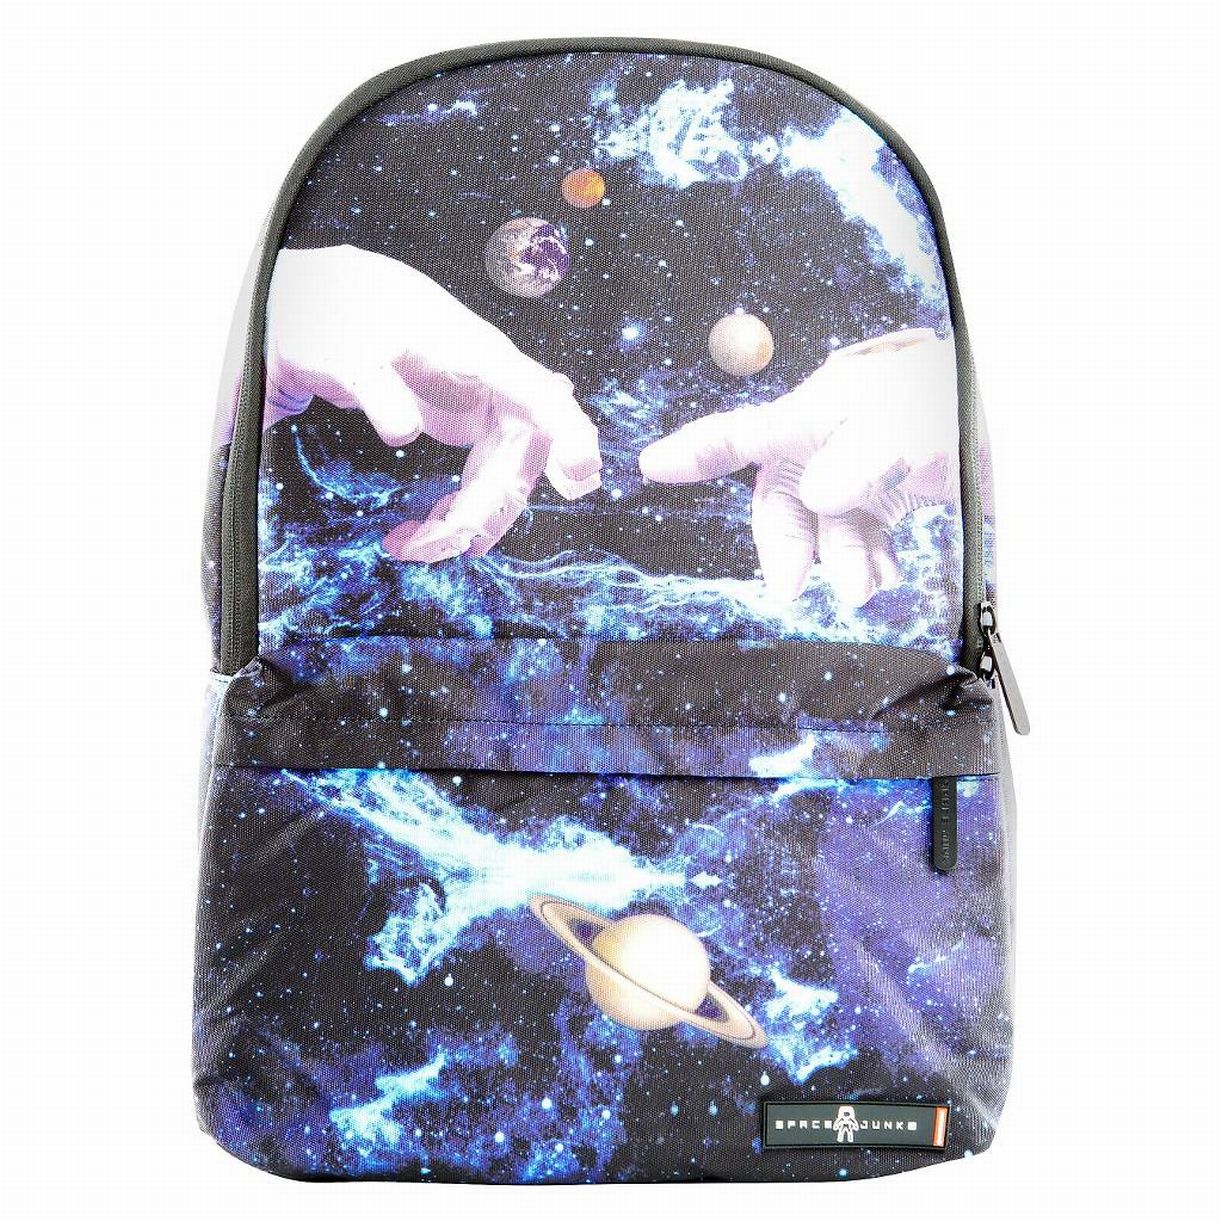 Space Junk 18.5" Astronaut Hands Blue Backpack - School Travel Pack - image 2 of 3